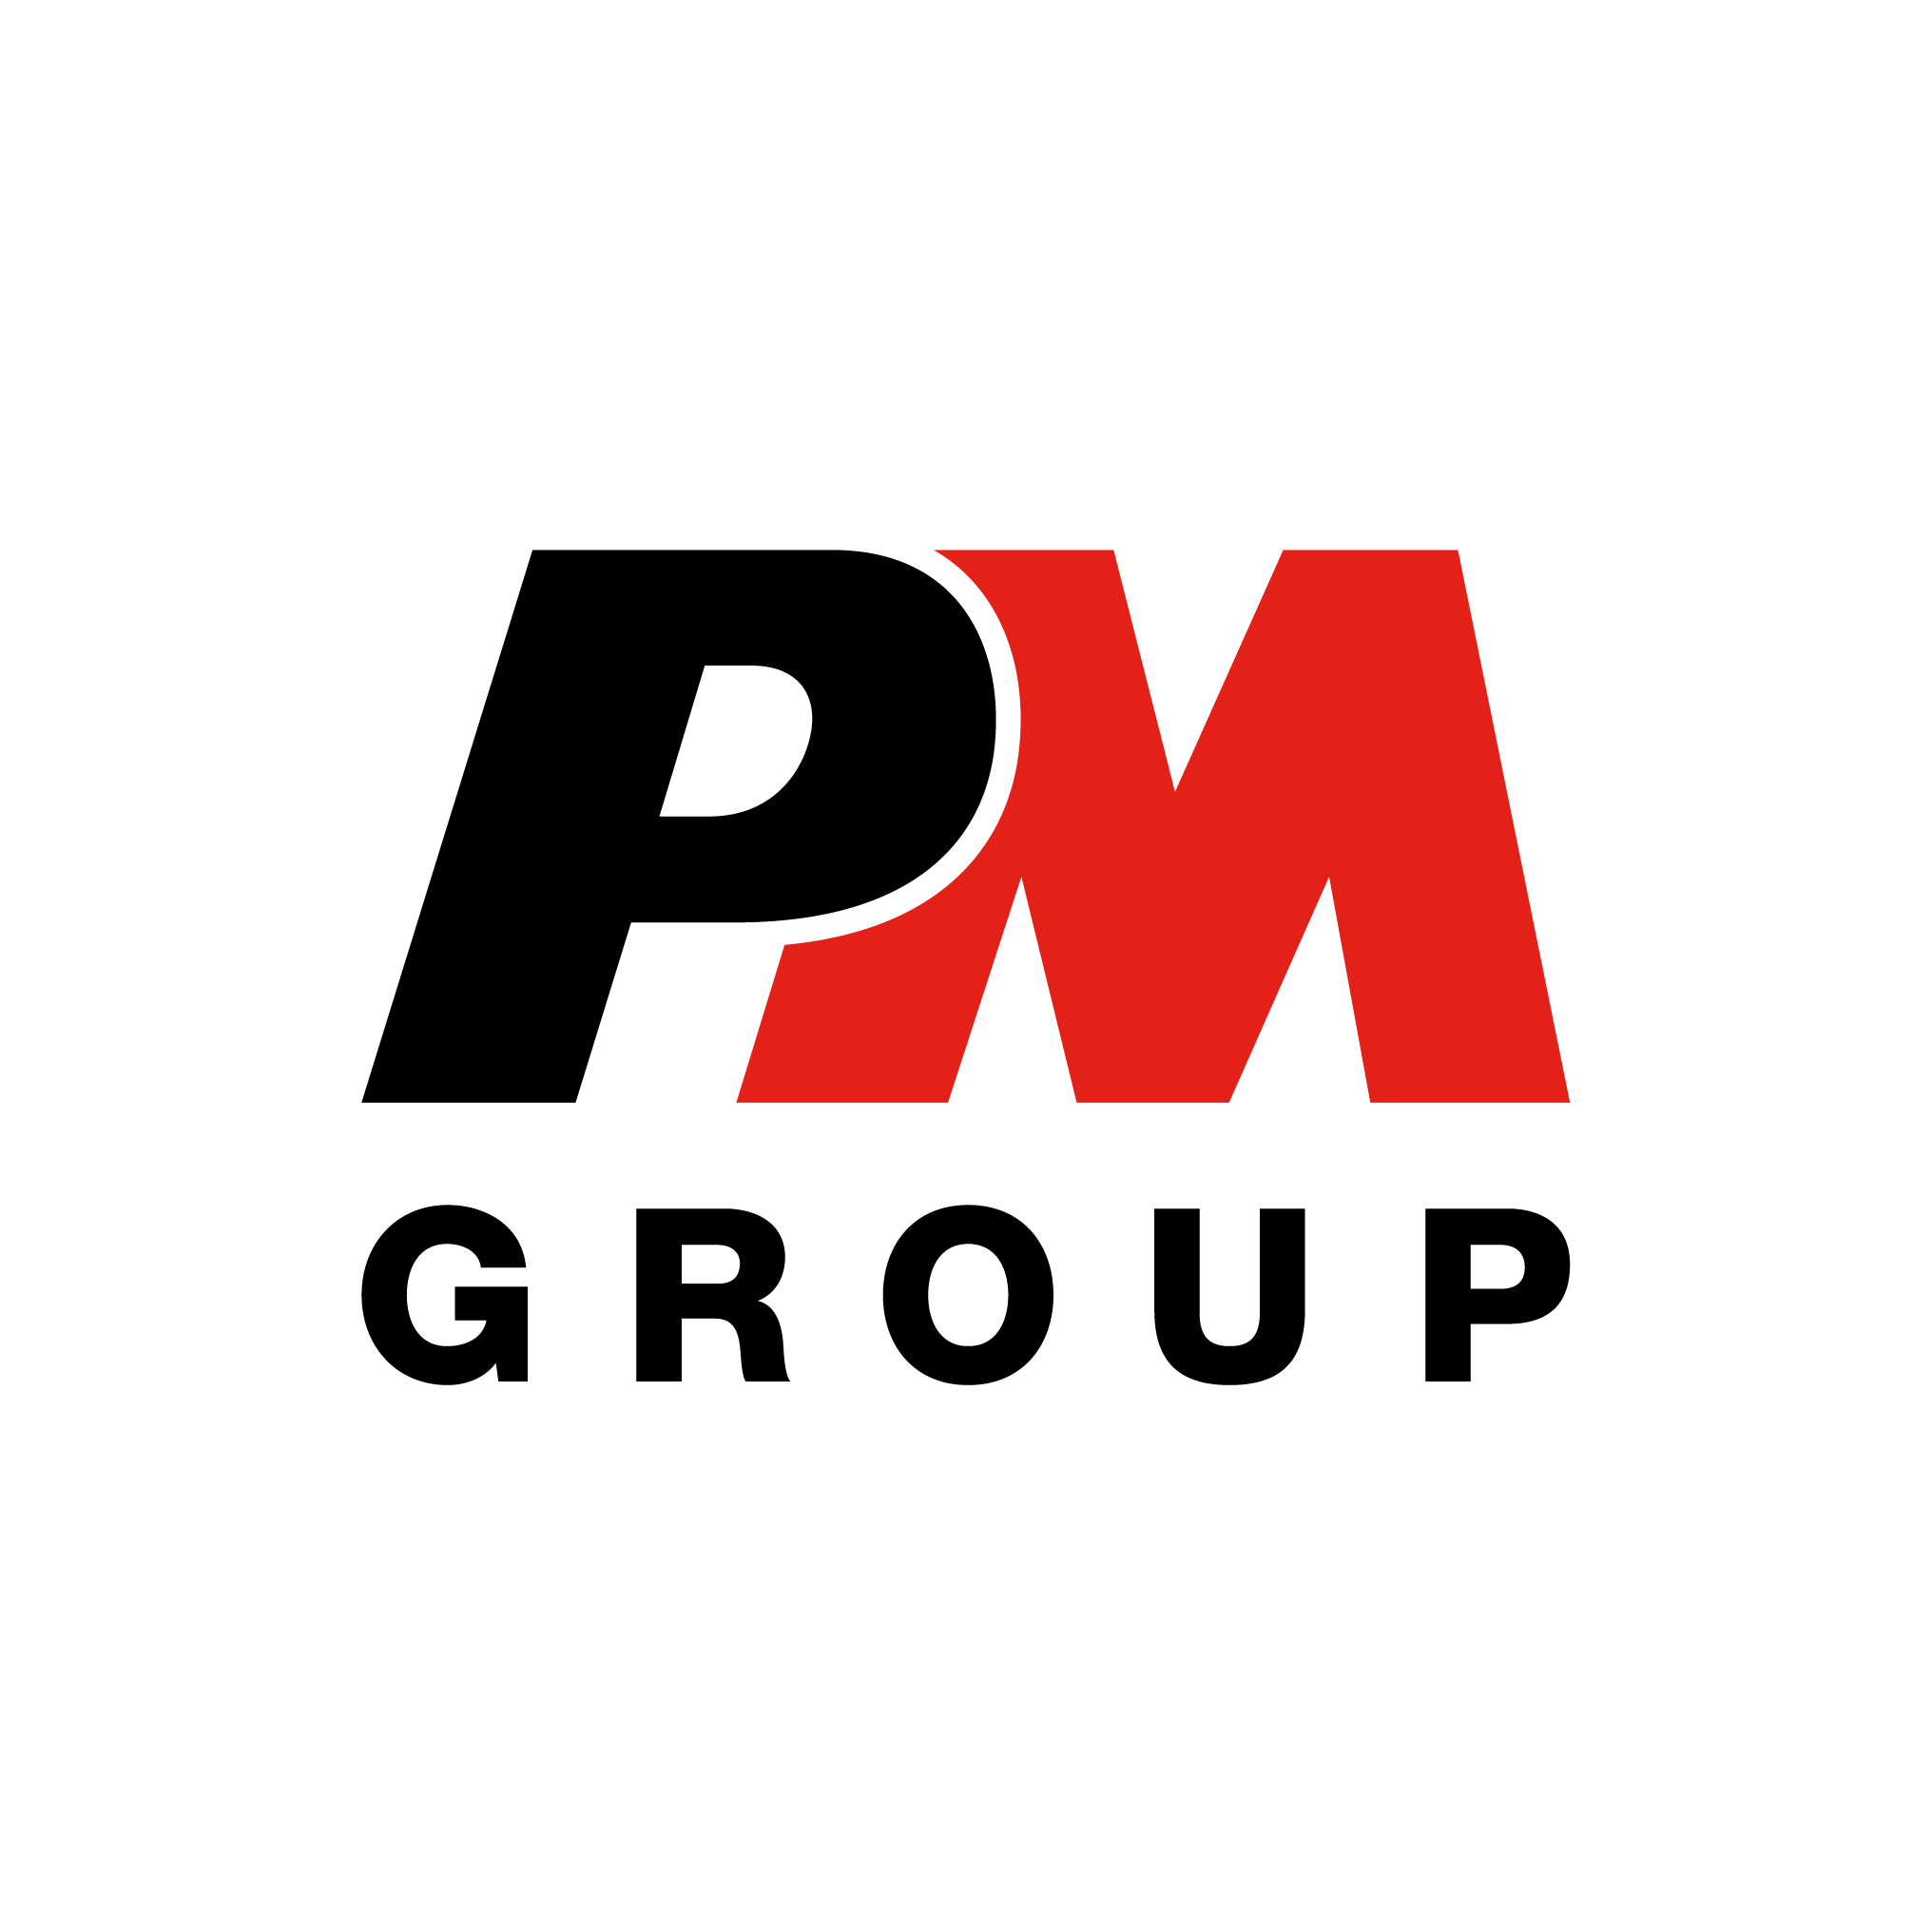 PM Group jobs